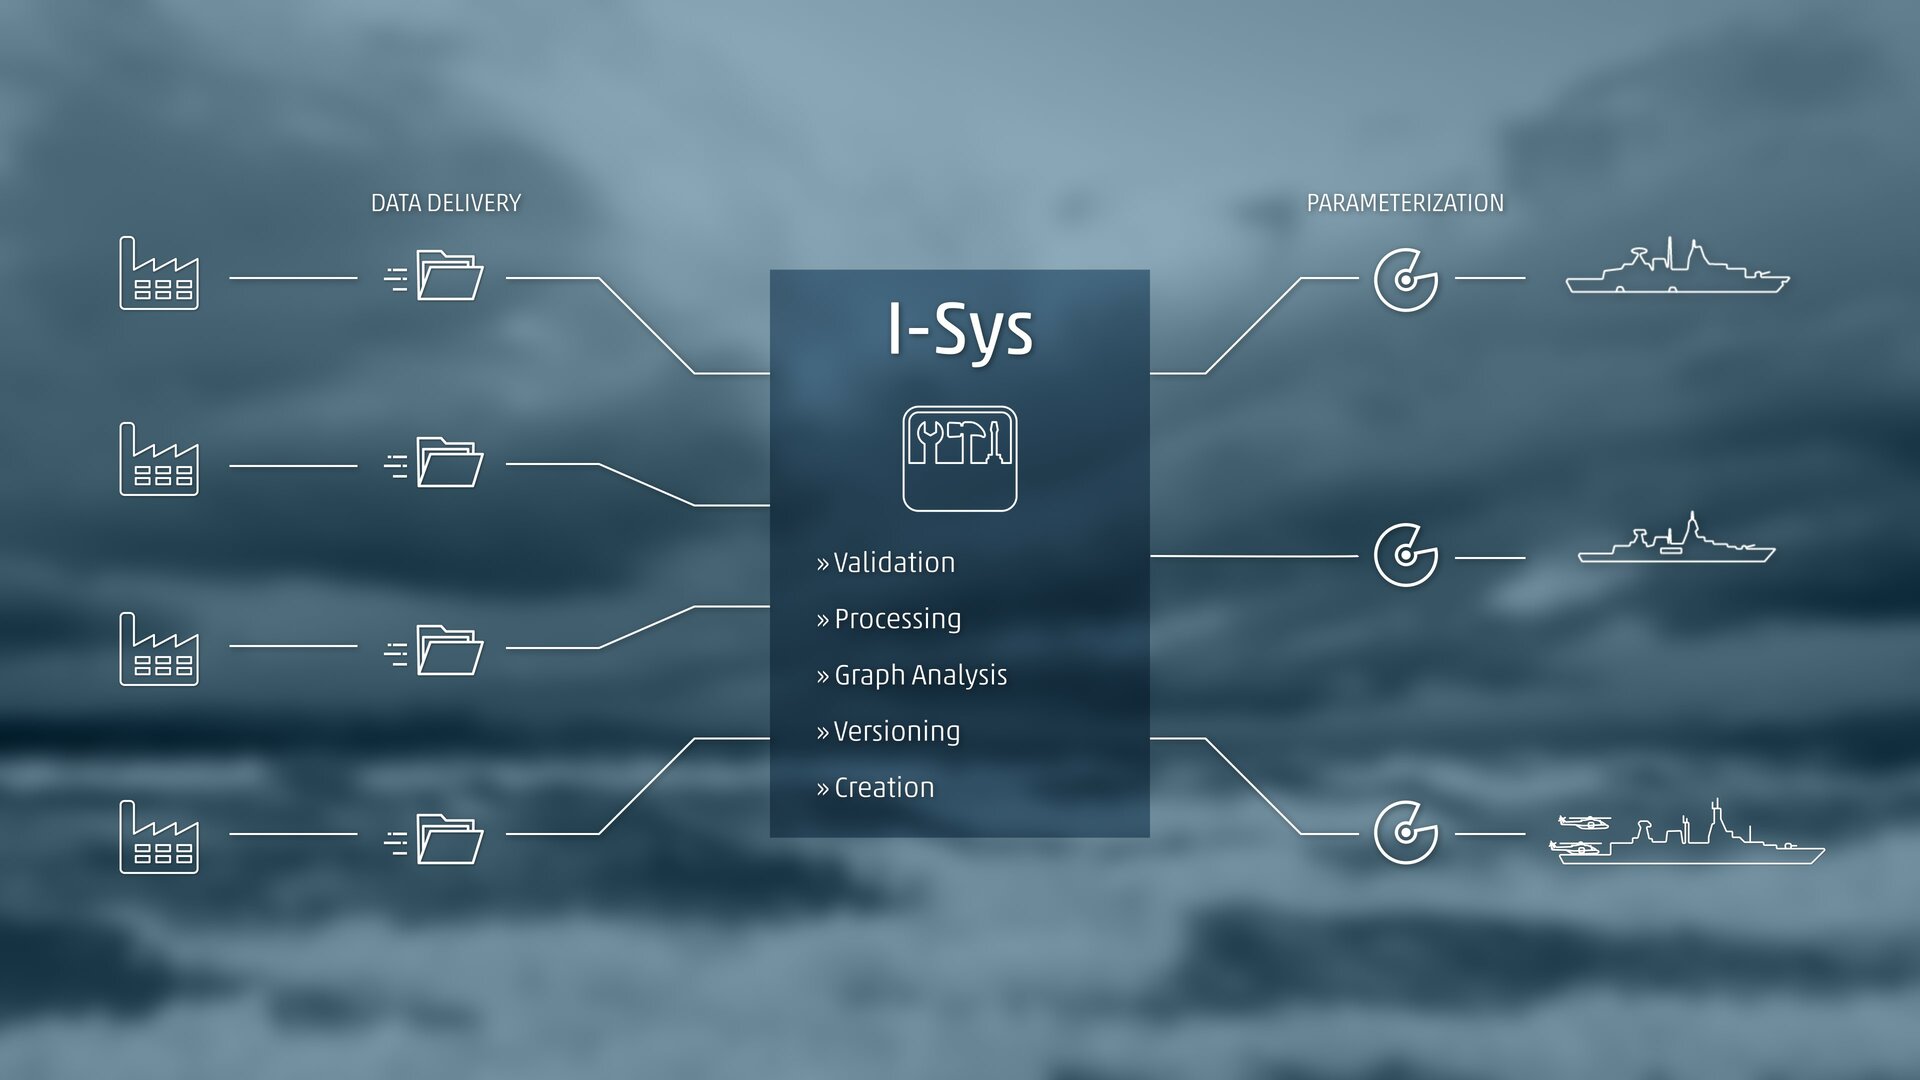 I-Sys is a distributed database system (client/server architecture).